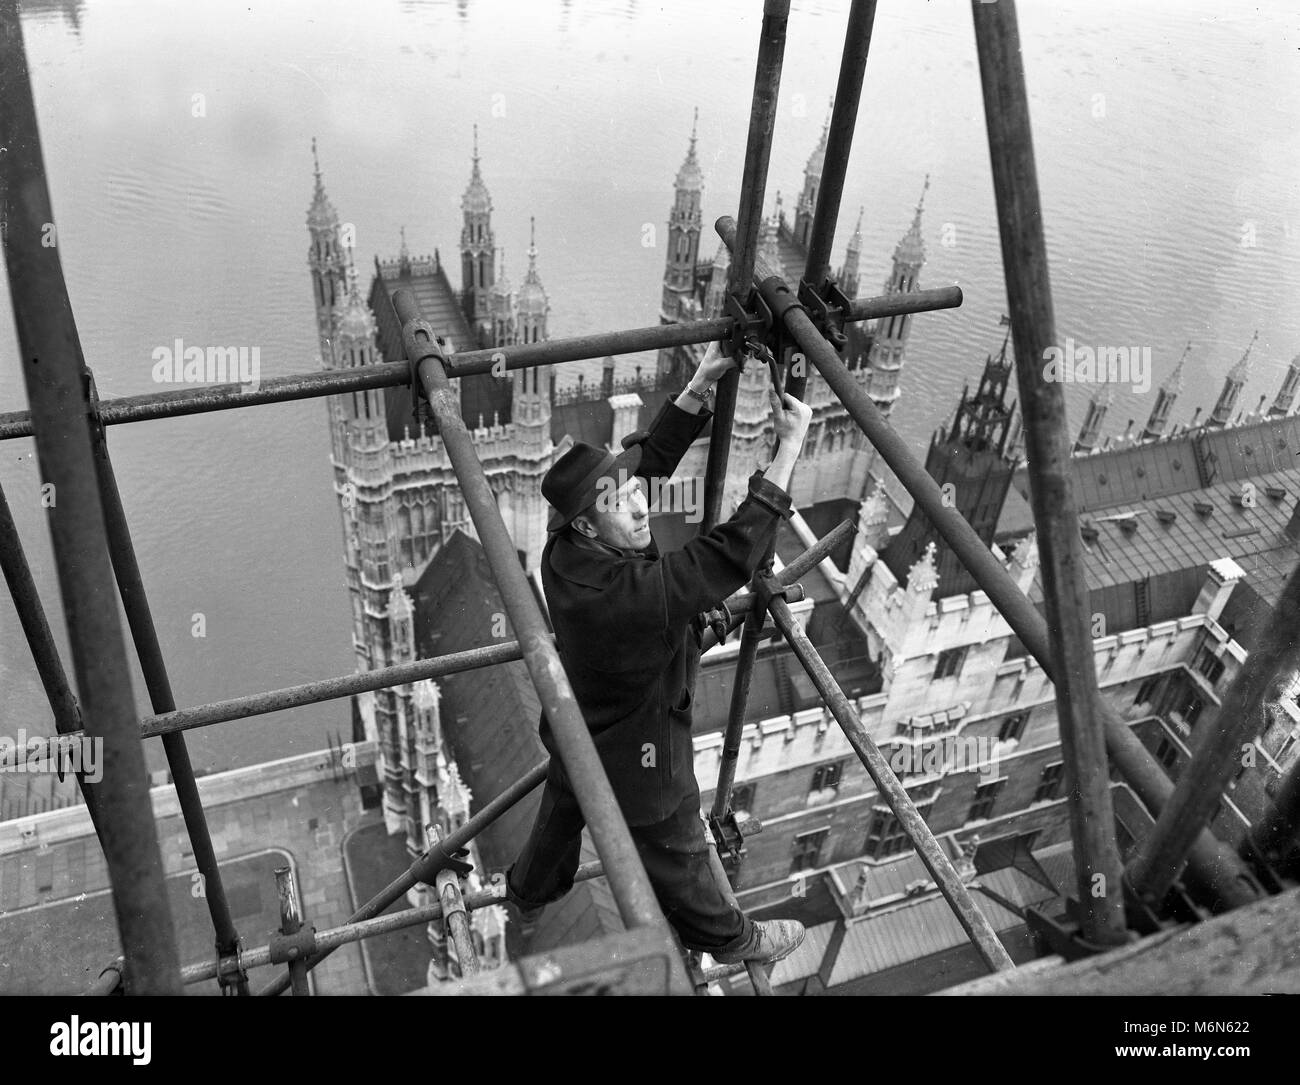 Construction worker erecting scaffolding on the 'Big Ben' clock tower on the Houses of Parliament also called Palace of Westminster in 1948. Pre health and safety at work regulations. Stock Photo